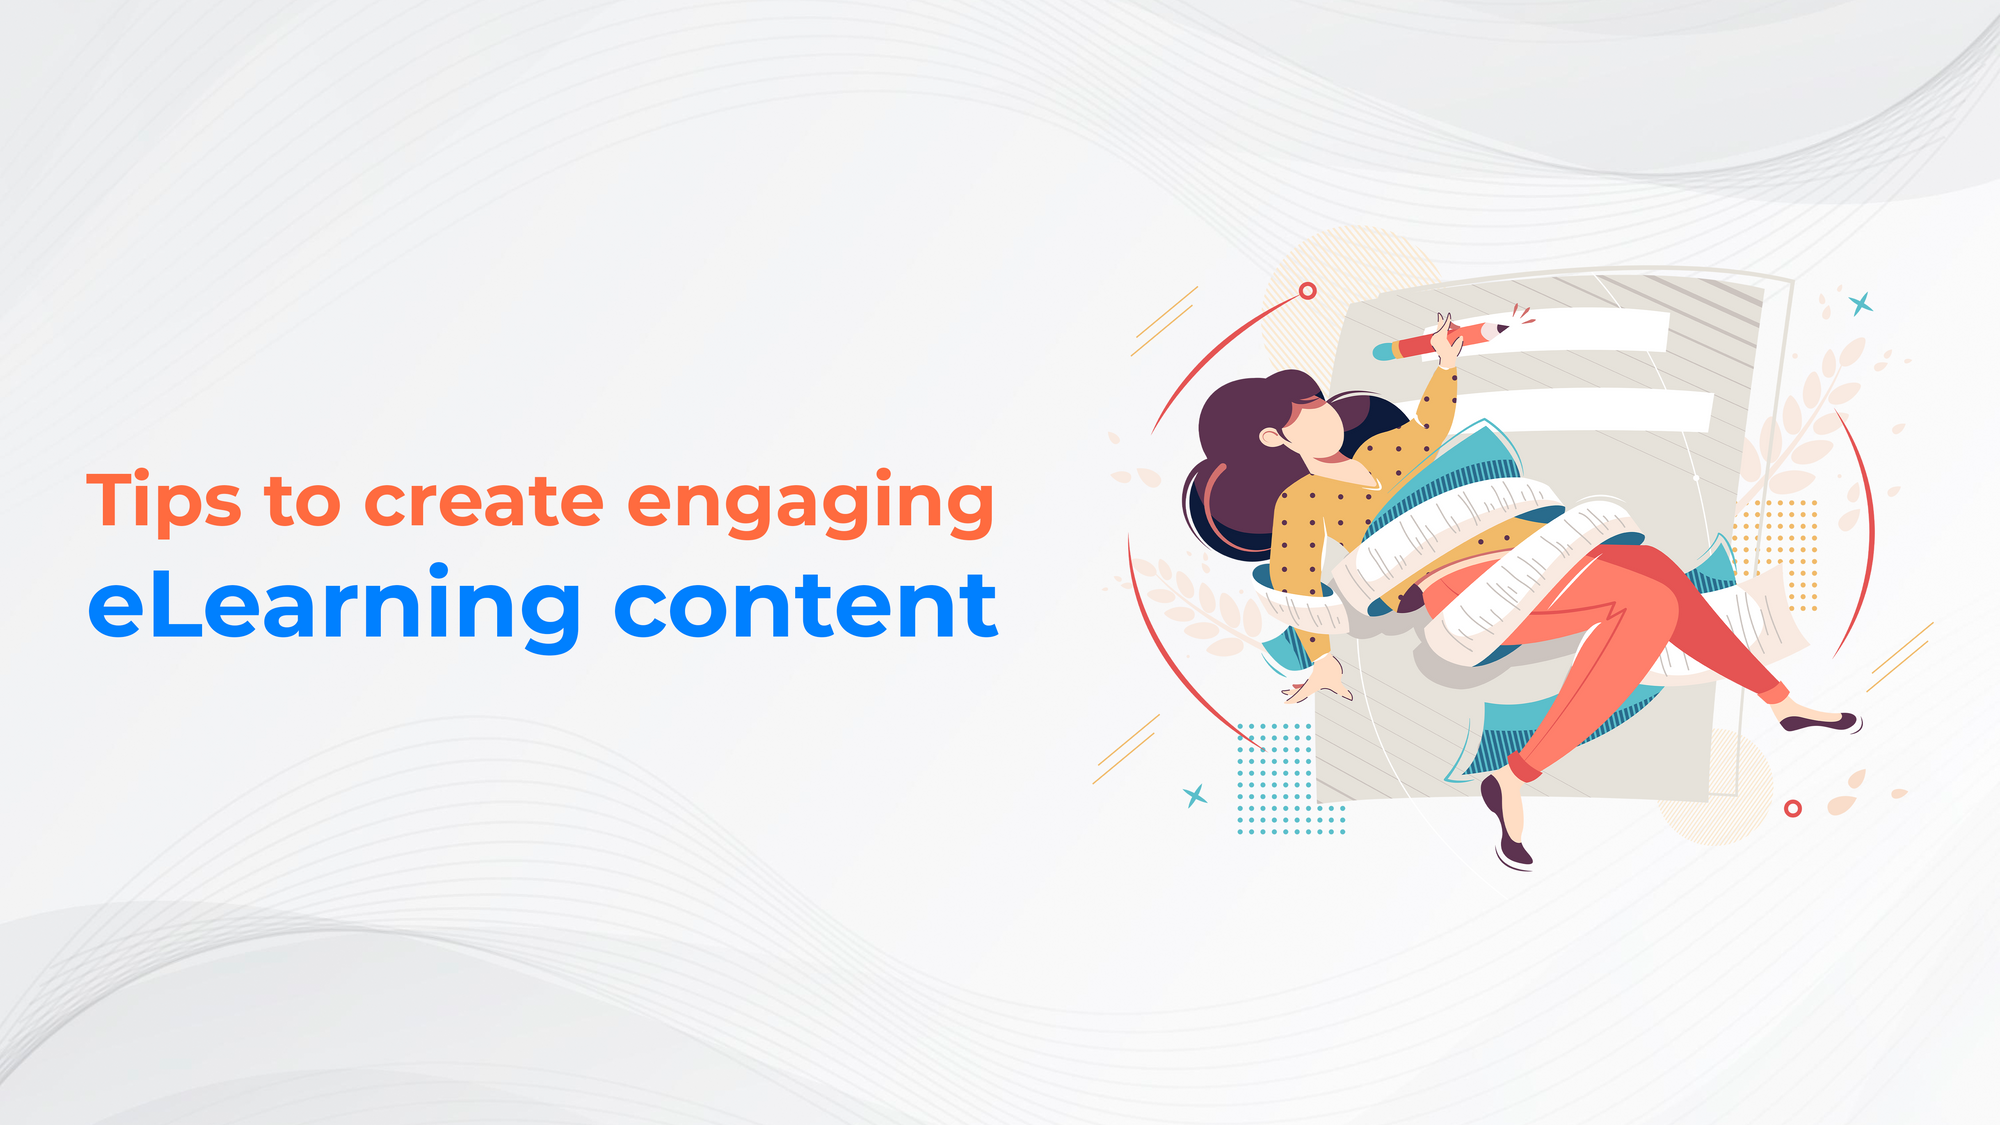 Tips to create engaging eLearning content